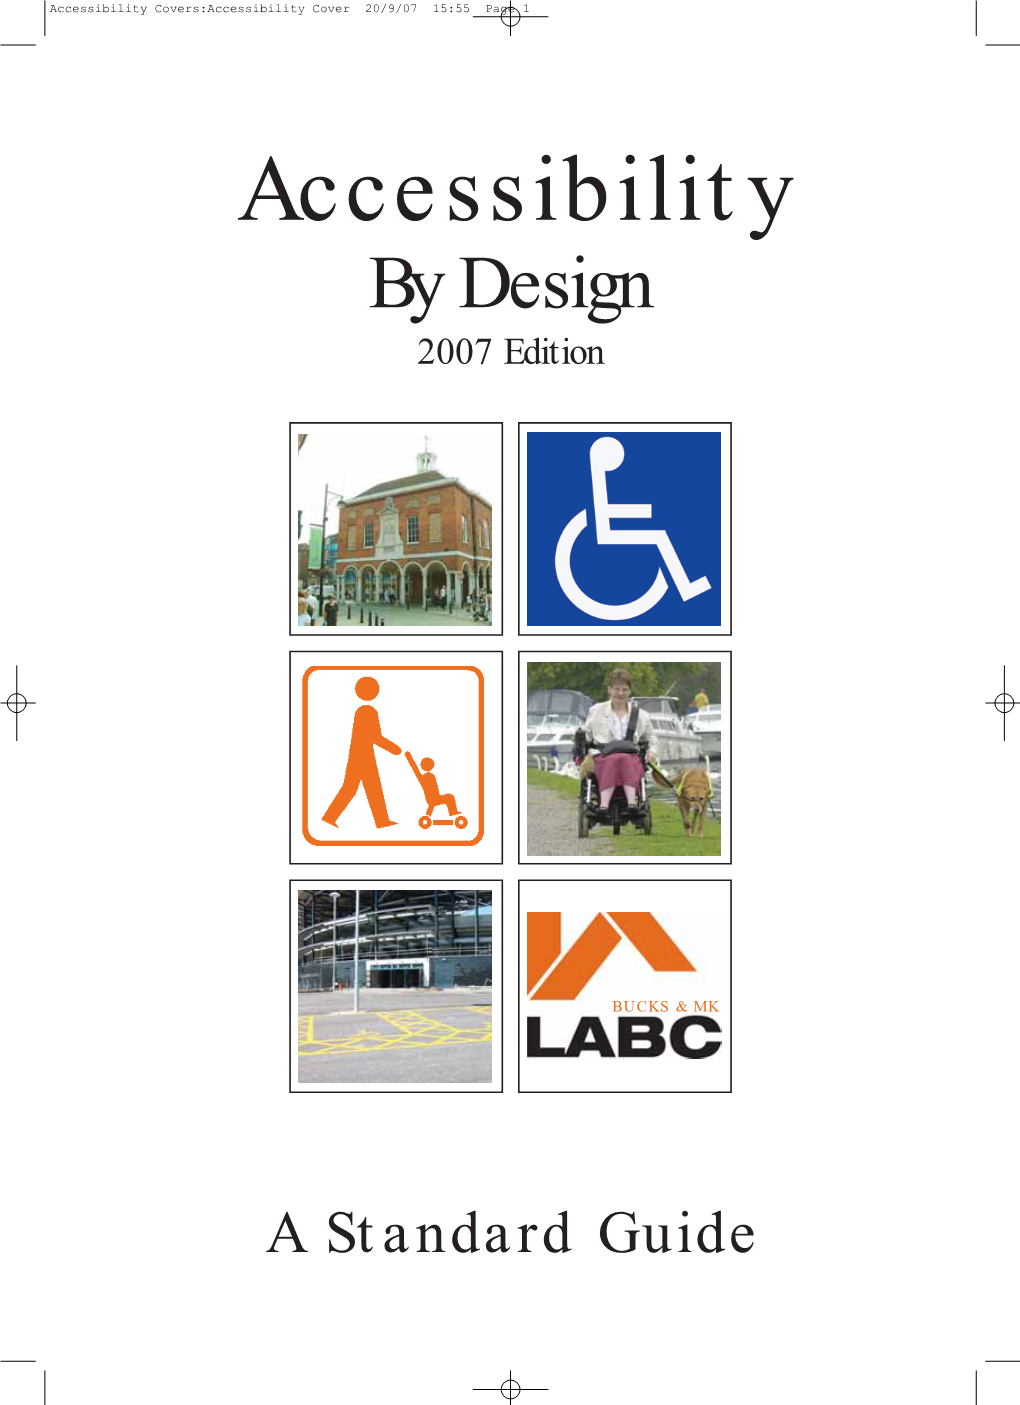 Accessibility by Design 2007 Edition